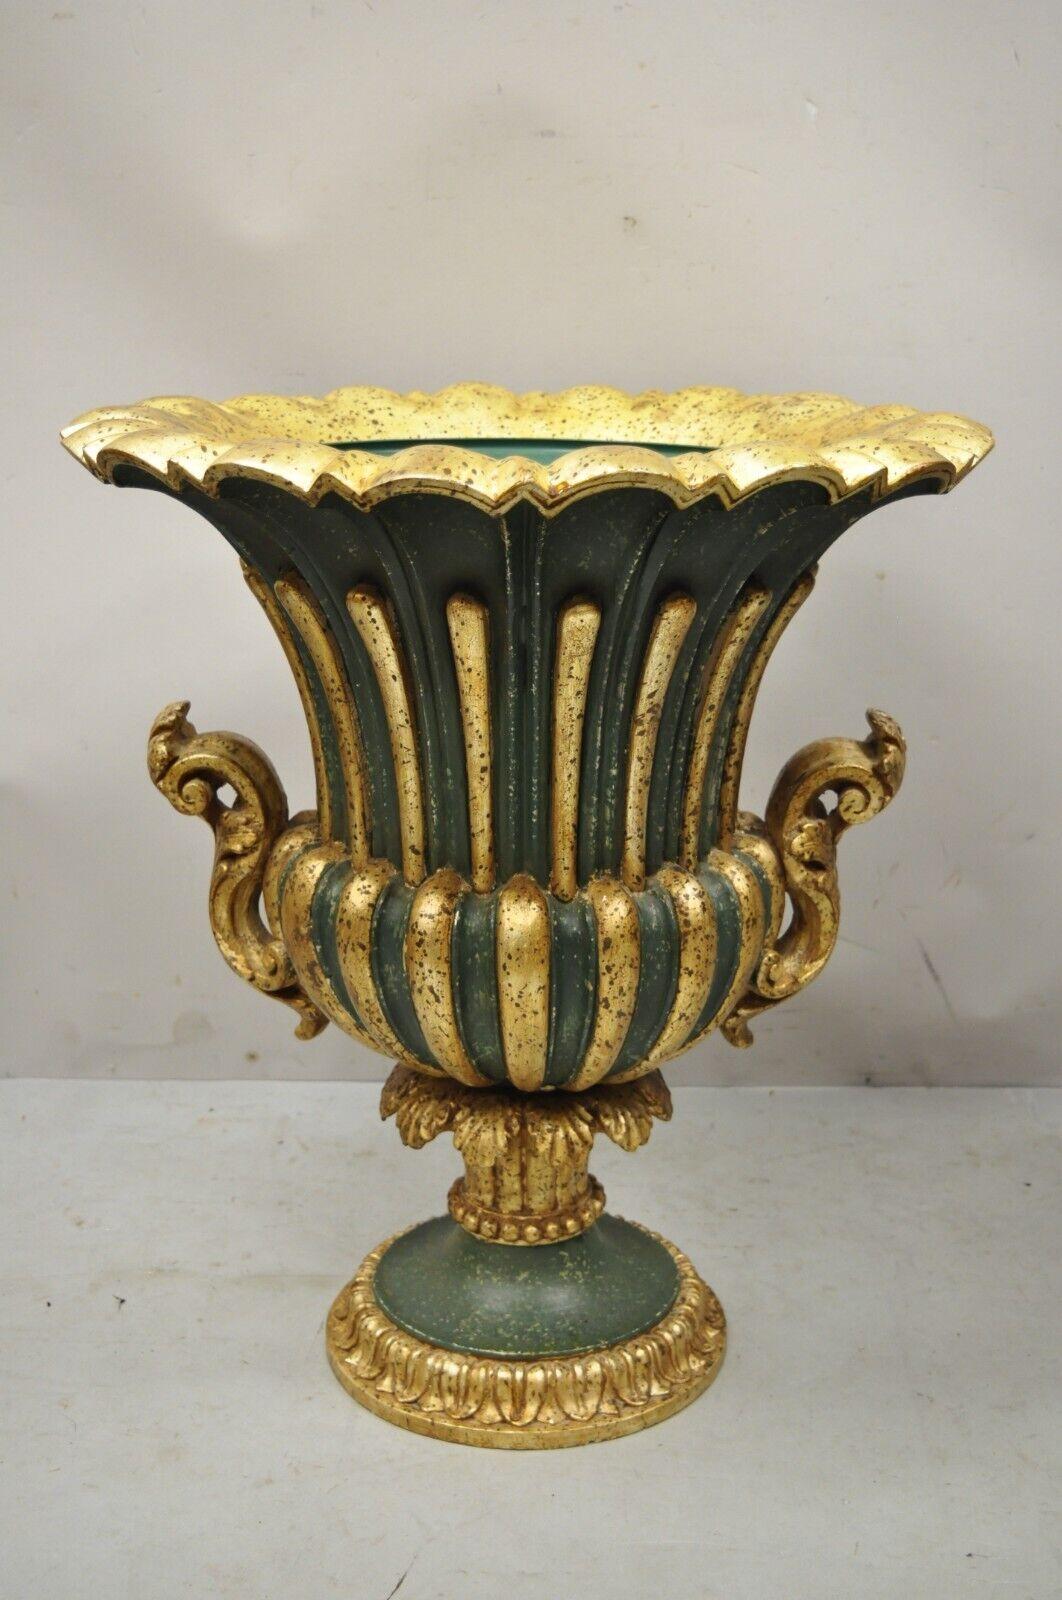 Vintage Italian Hollywood Regency green and gold large carved wood urn planter pot. Item features green and gold gilt distressed finish, solid carved wood frame, metal planter pot, stamped 